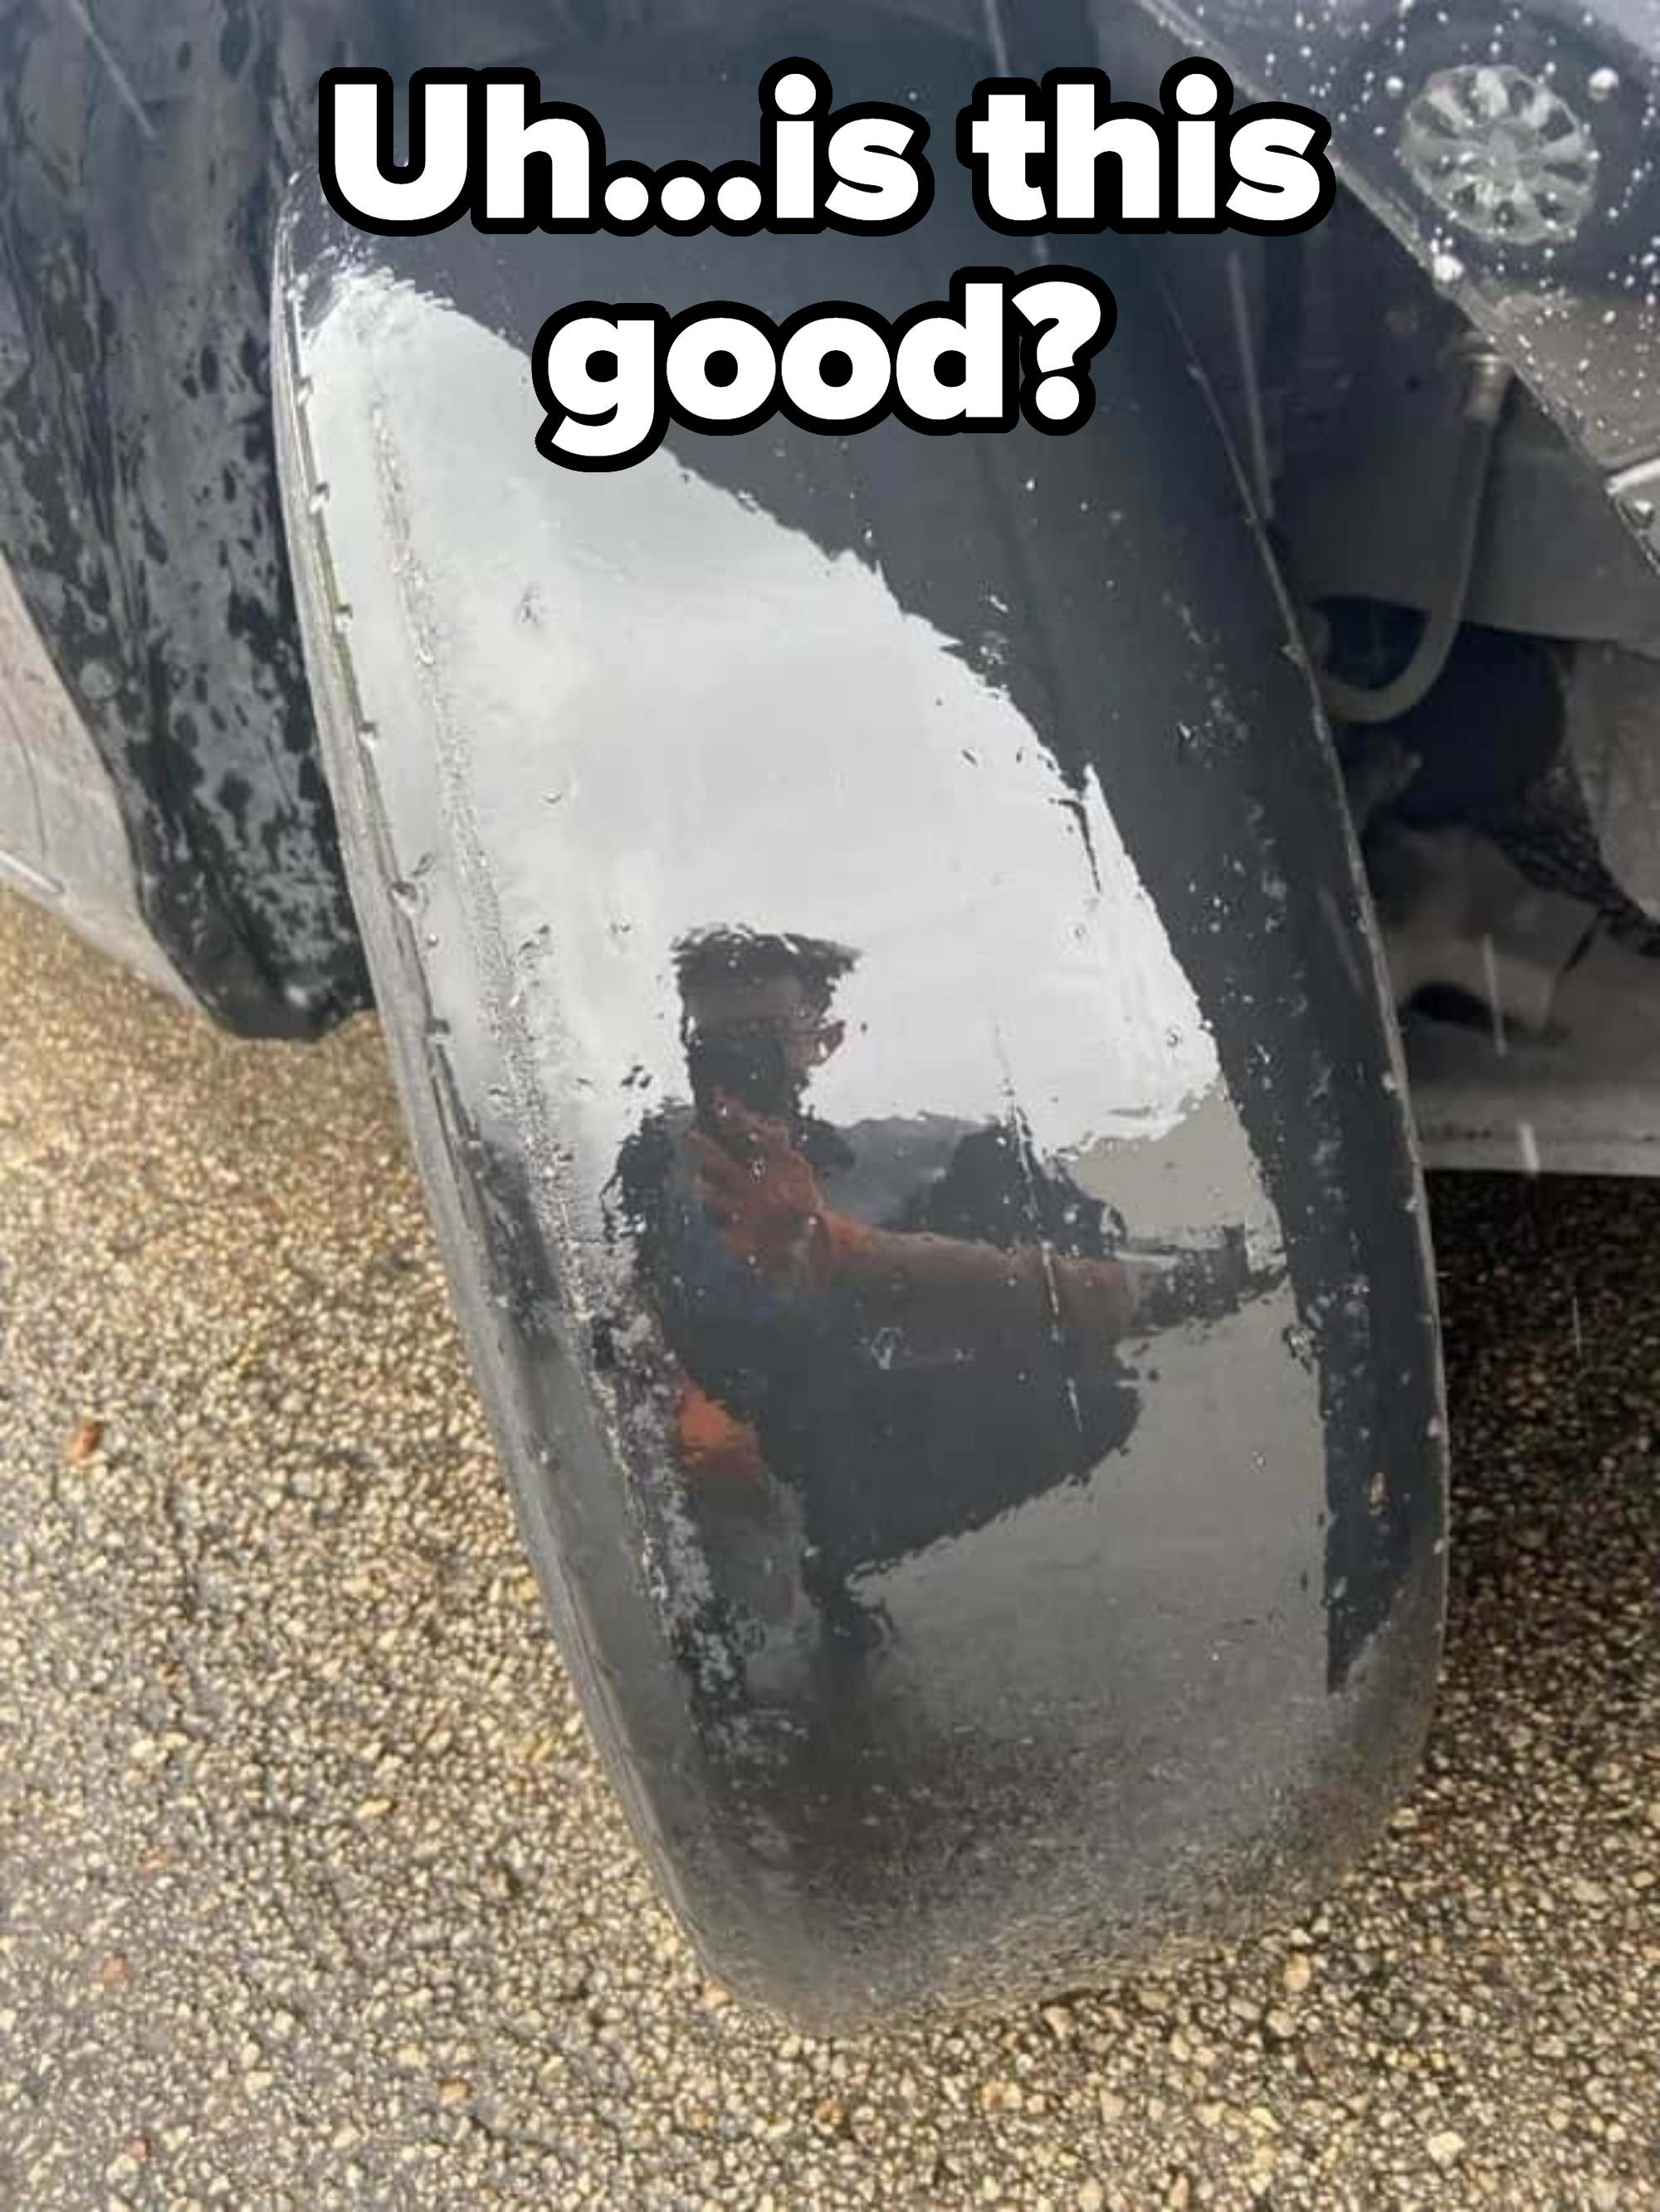 &quot;Uh...is this good?&quot;: With their reflection seen in their very smooth tire